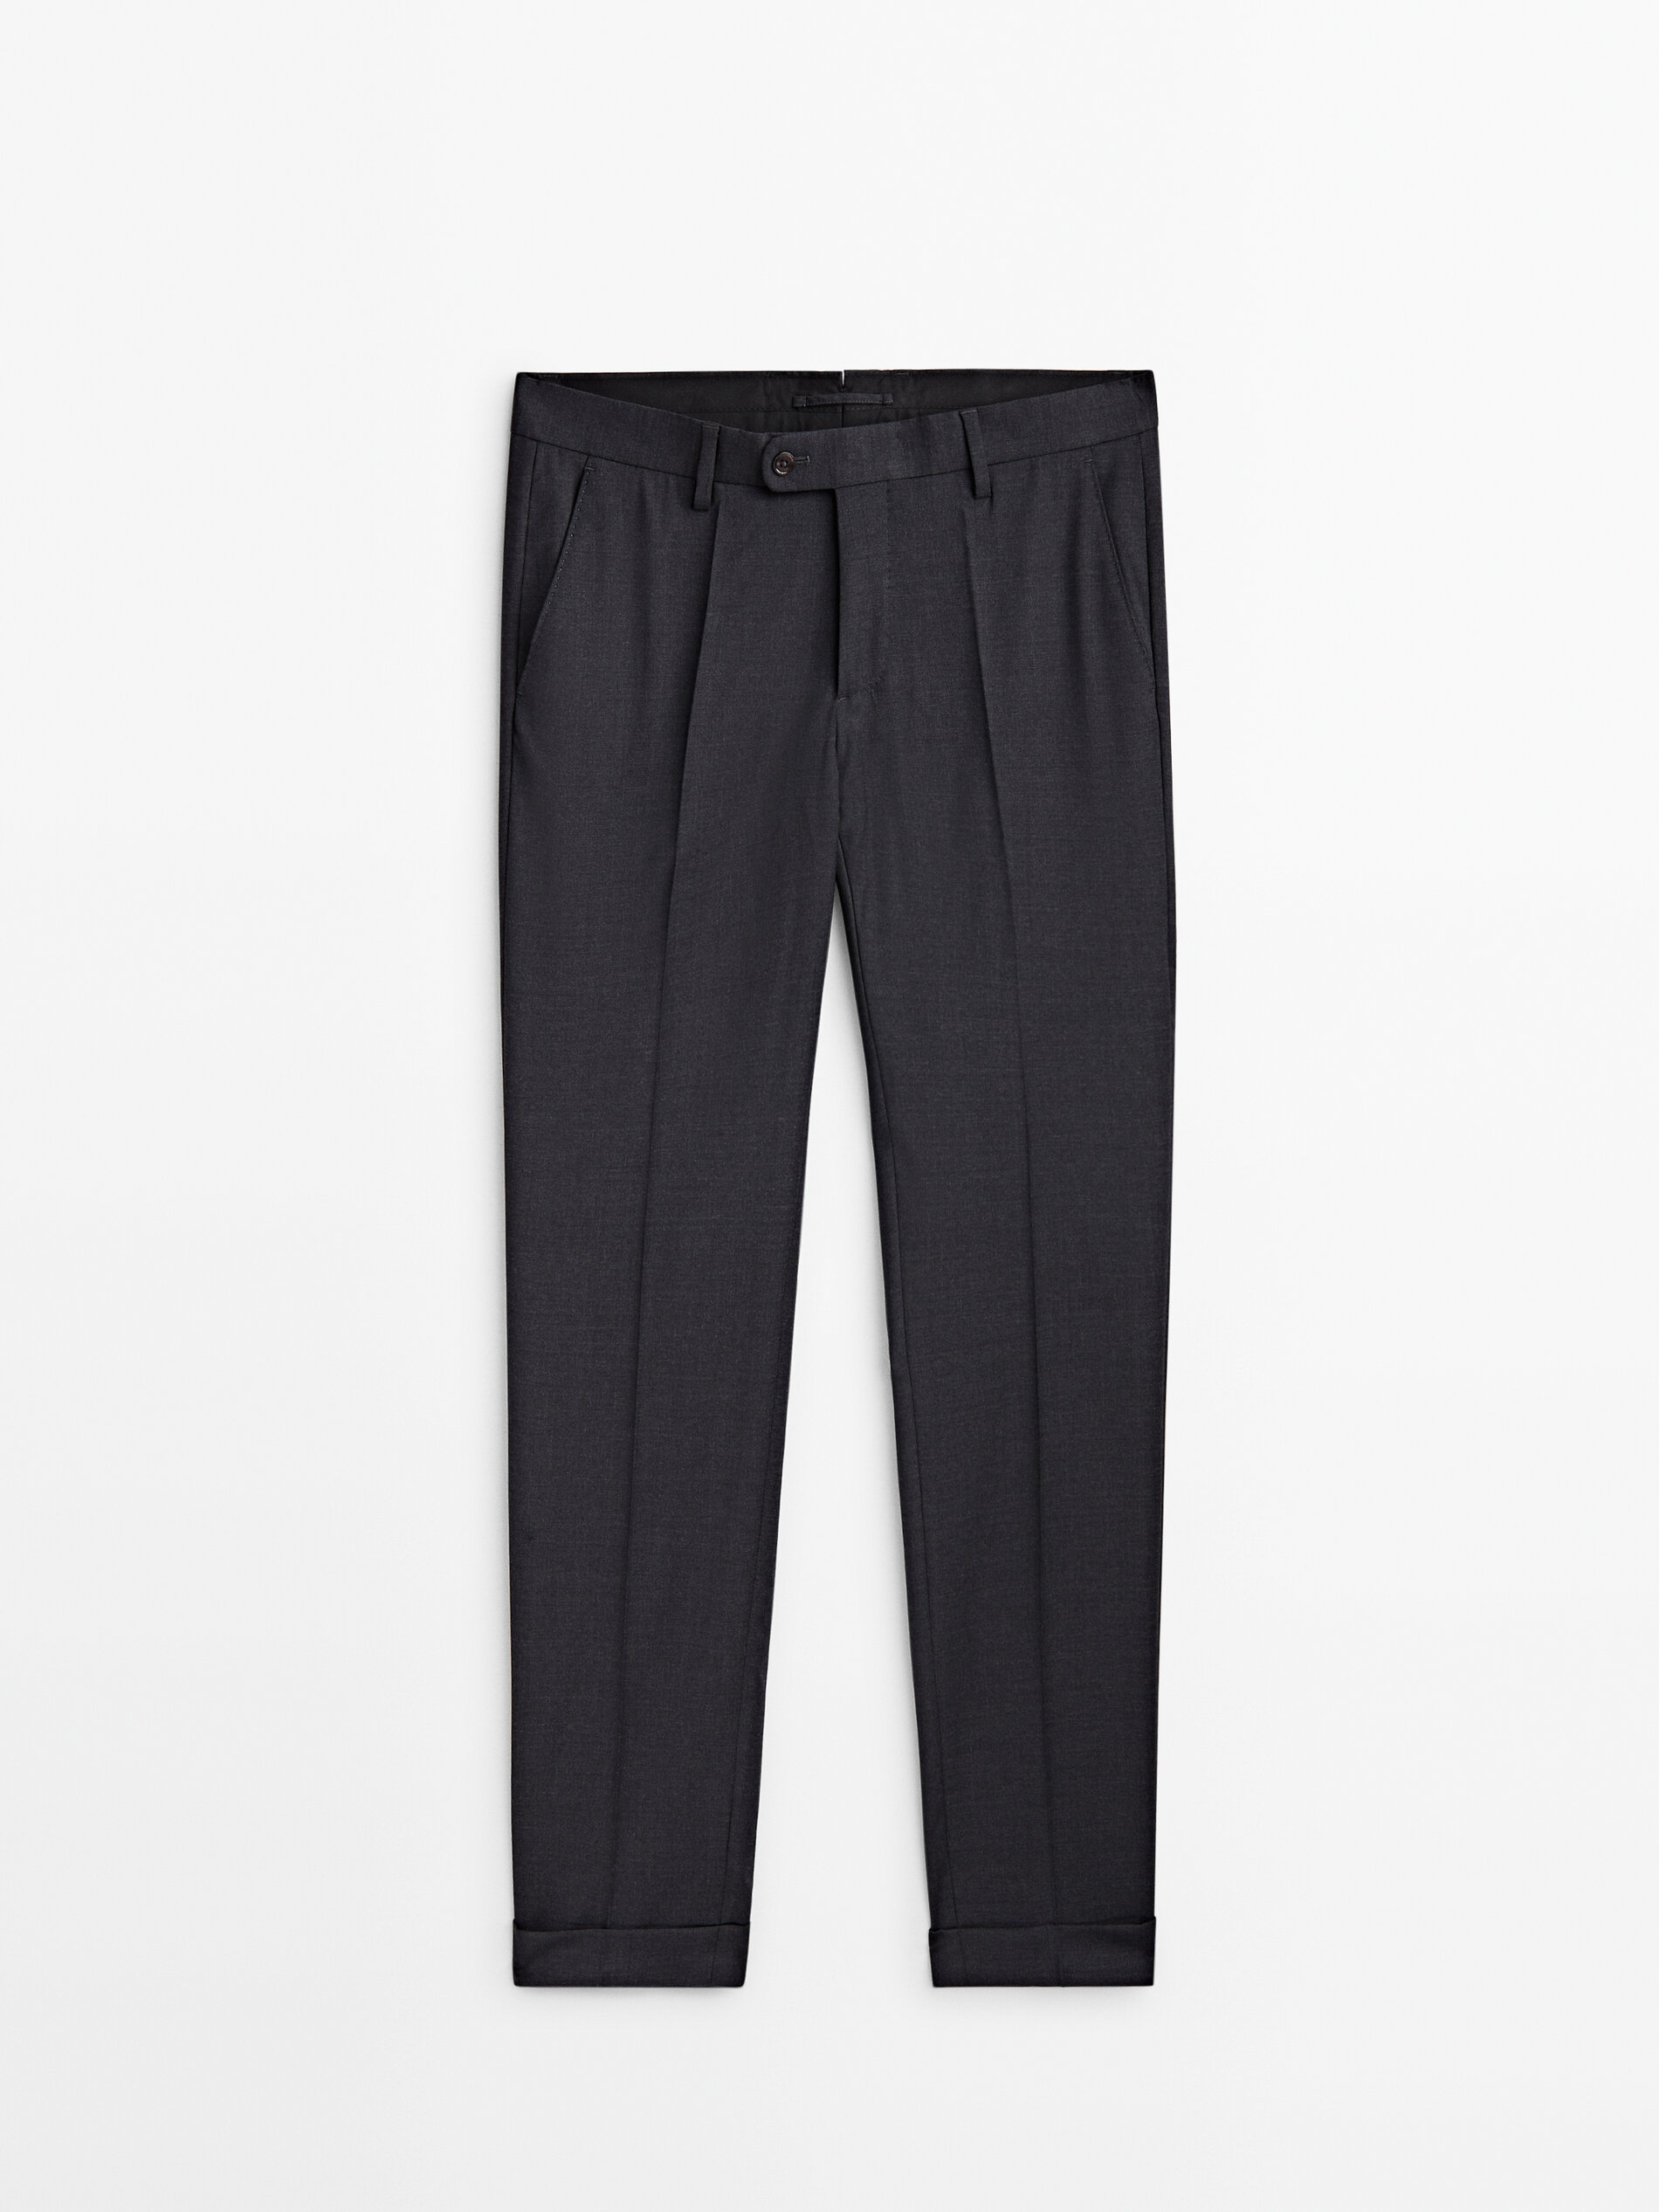 grey suit black trousers for SaleUp To OFF 68